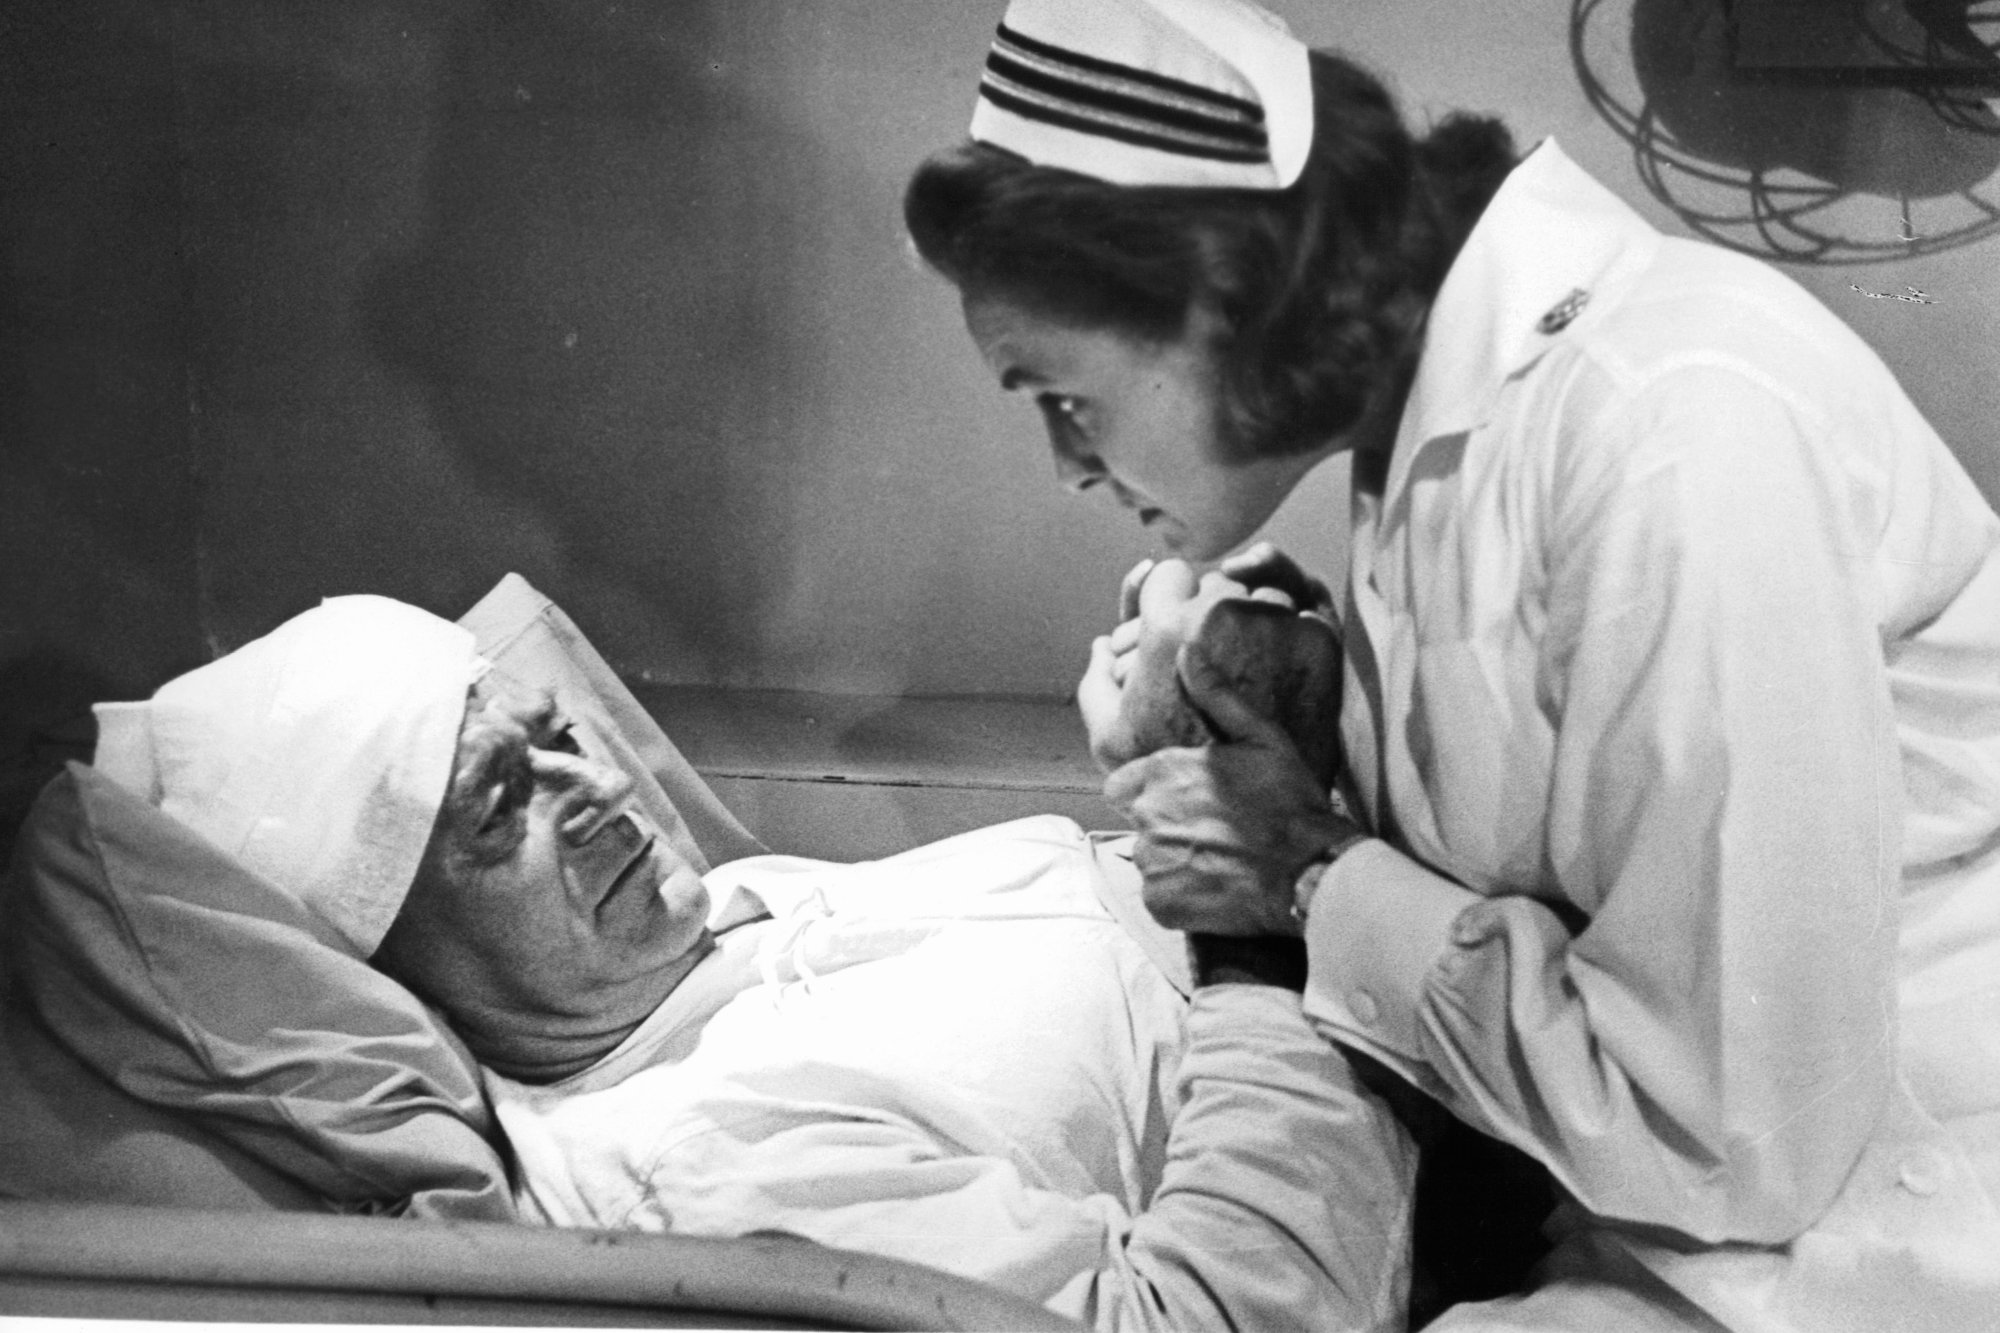 'In Harm's Way' John Wayne as Rock and Patricia Neal as Maggie. He's laying in bed with bandages on his head. She's wearing a nurse outfit, holding onto his hands.